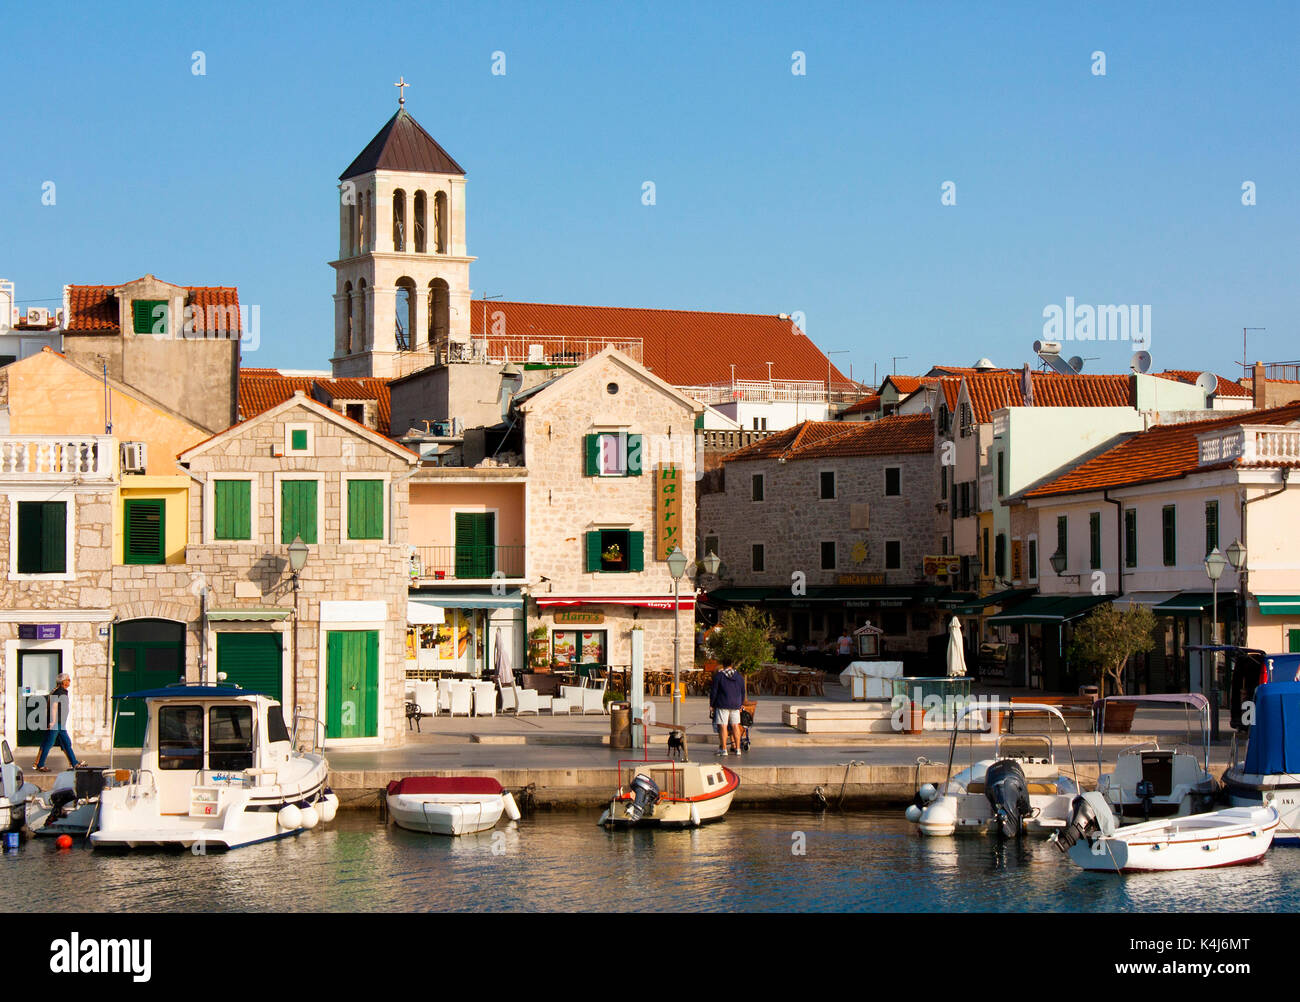 Vodice, Croatia - August 22, 2017: Sunny morning in small Mediterranean town square with stone houses and old church tower. with moored boats on the d Stock Photo